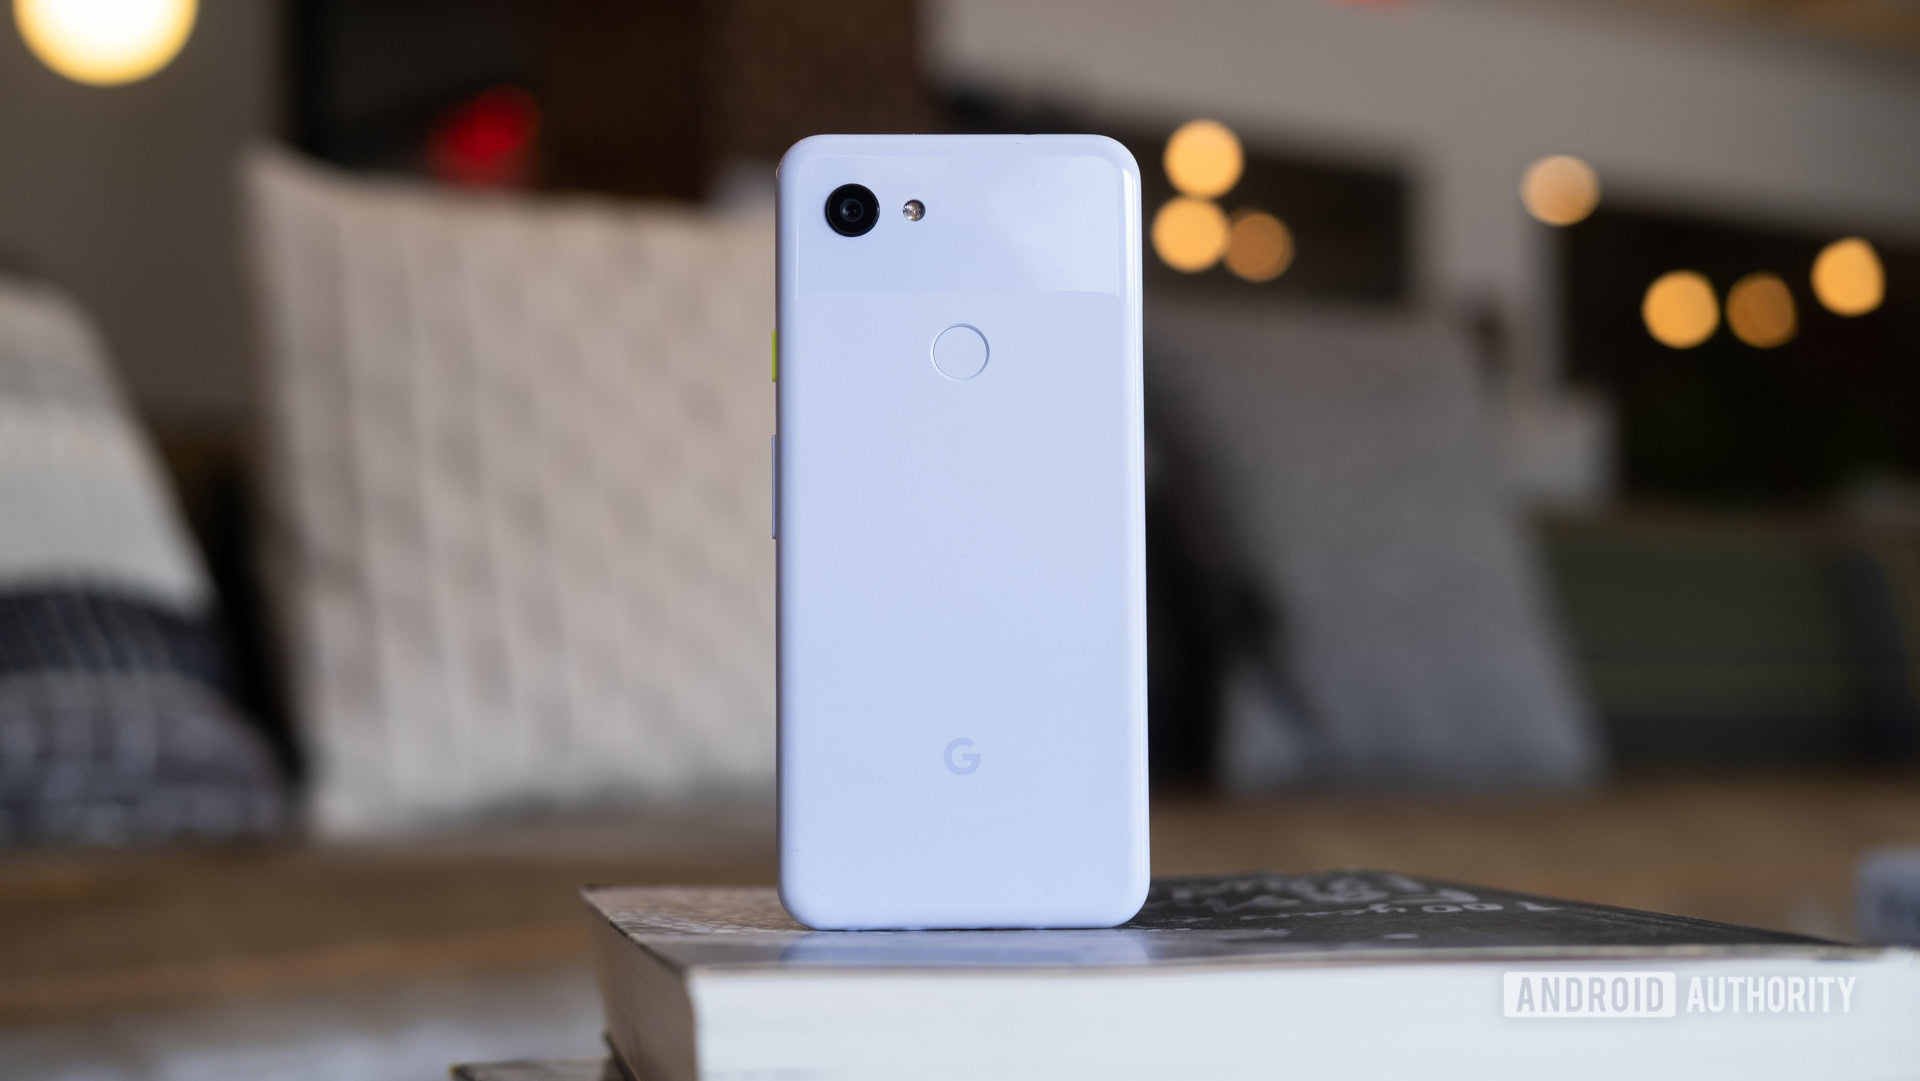 5 additions and tweaks we’d like to see from Google Pixel 4a